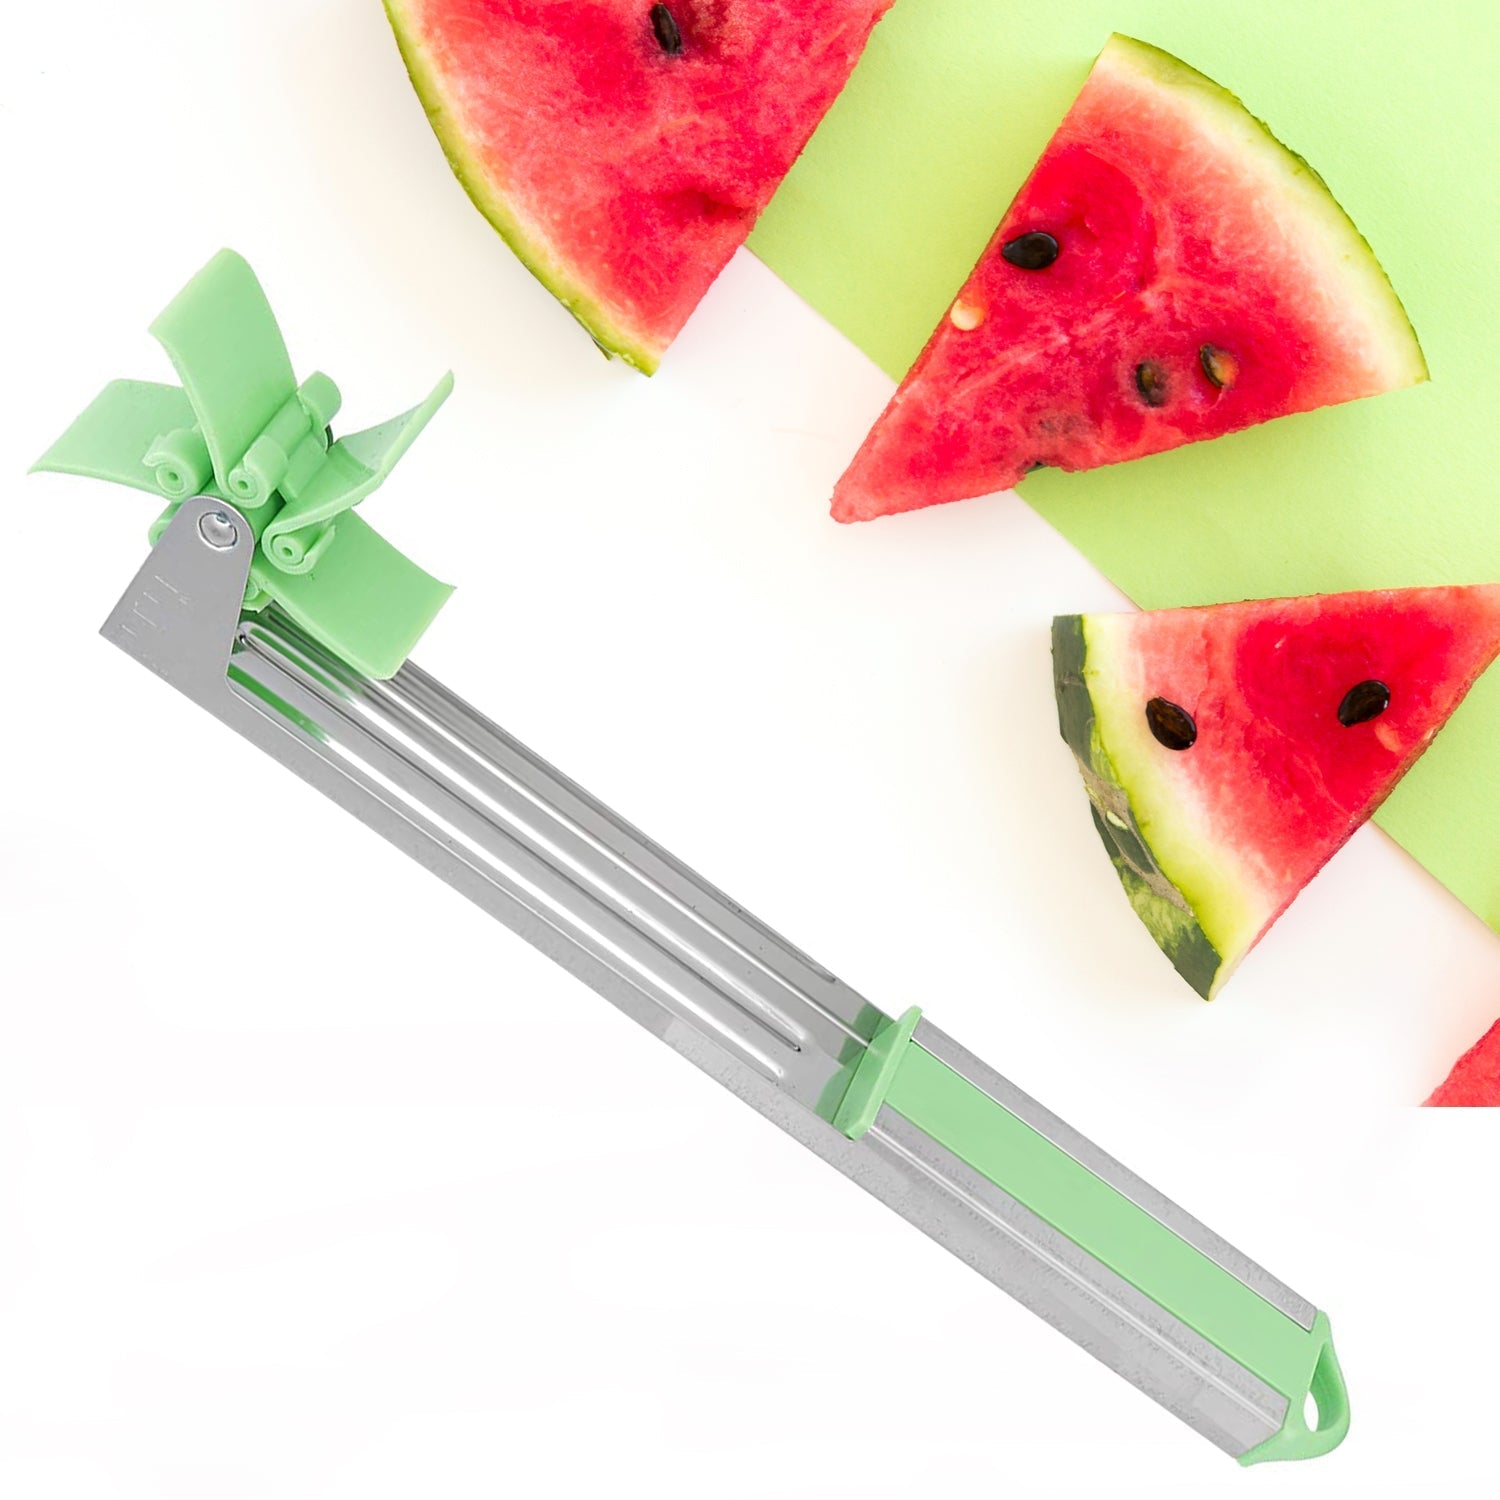 7160 Stainless Steel Washable Watermelon Cutter Windmill Slicer Cutter Peeler for Home/Smart Kitchen Tool Easy to Use DeoDap